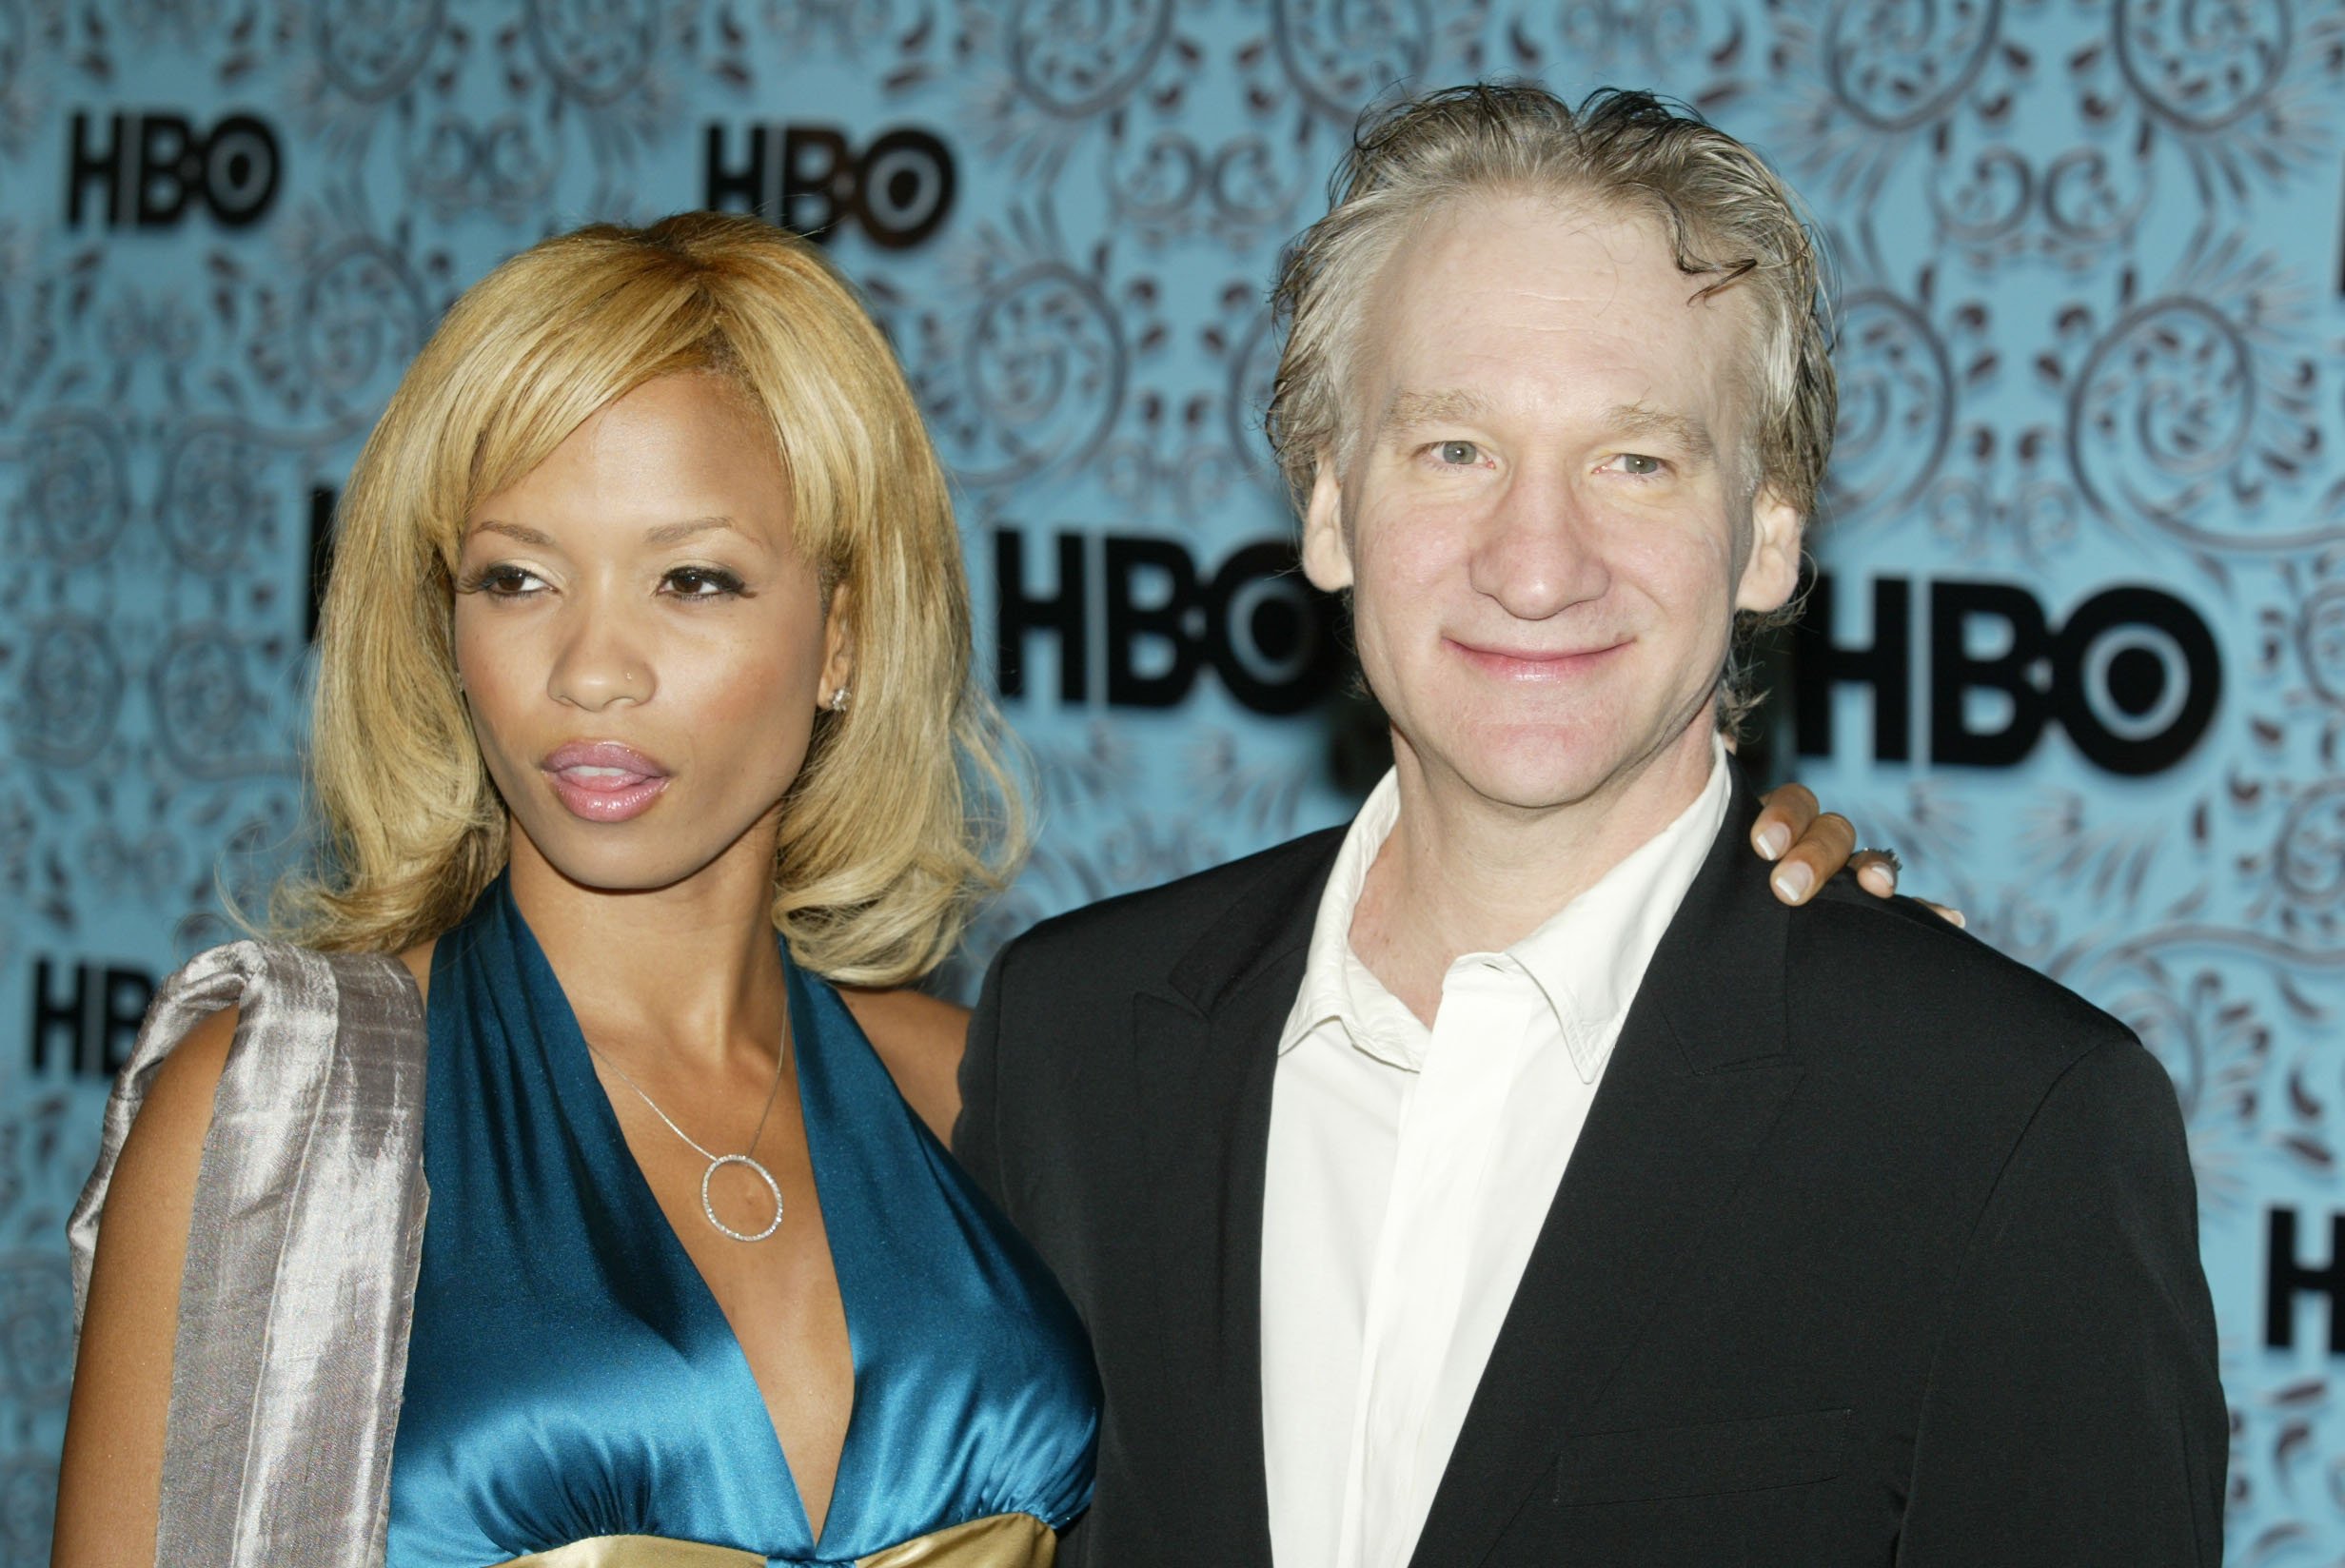 Karrine Steffans and Bill Maher at the 57th Annual Emmy Awards on September 18, 2005 | Source: Getty Images